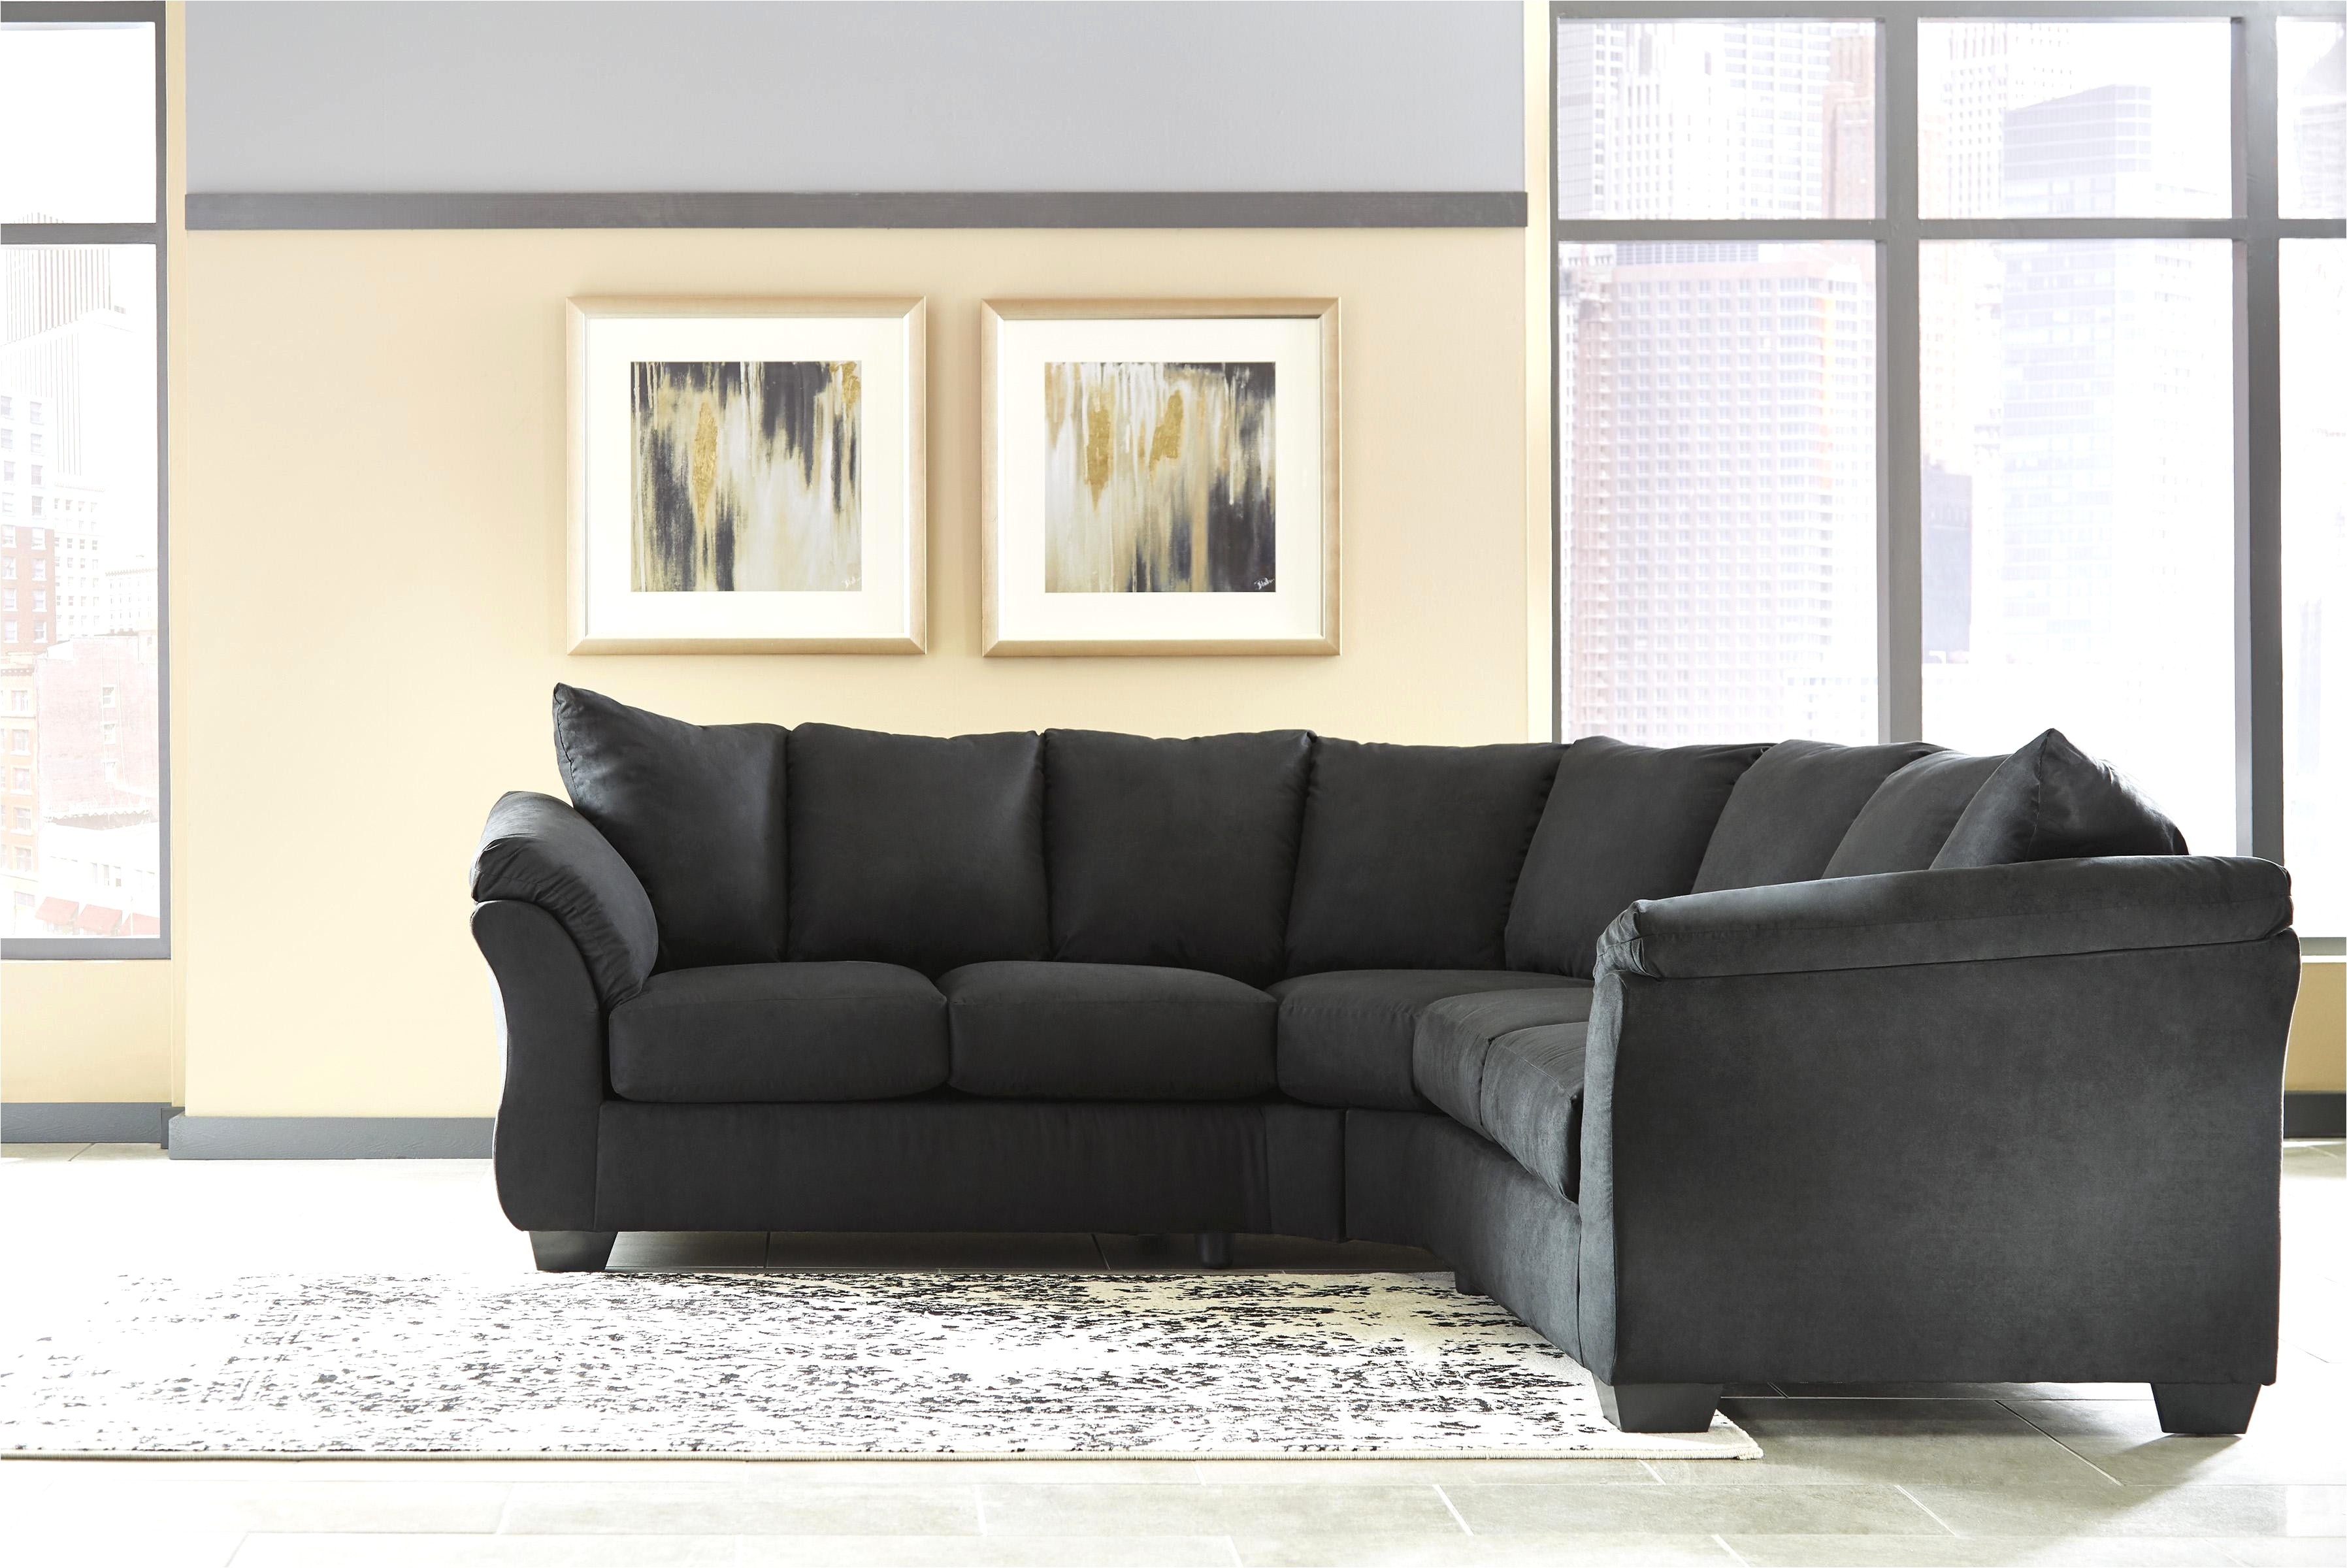 ergonomic living room chairs beautiful sectional couch 0d tags fabulous new sectional couch magnificent sectional sleeper